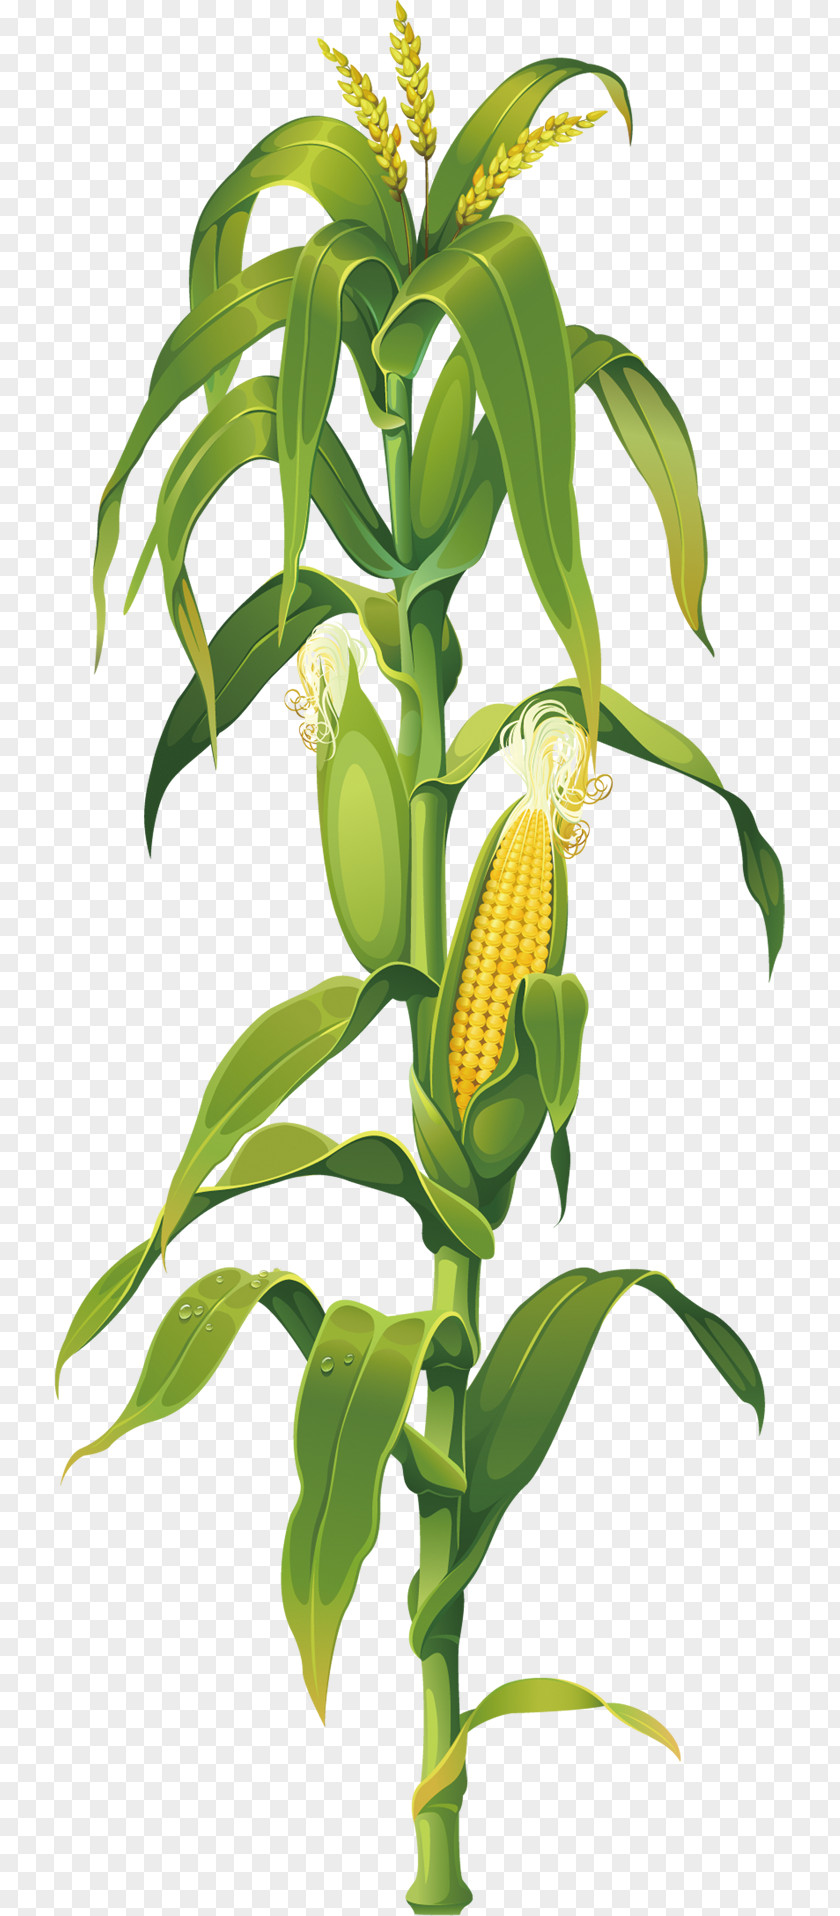 Corn Maize On The Cob Drawing Plant Clip Art PNG